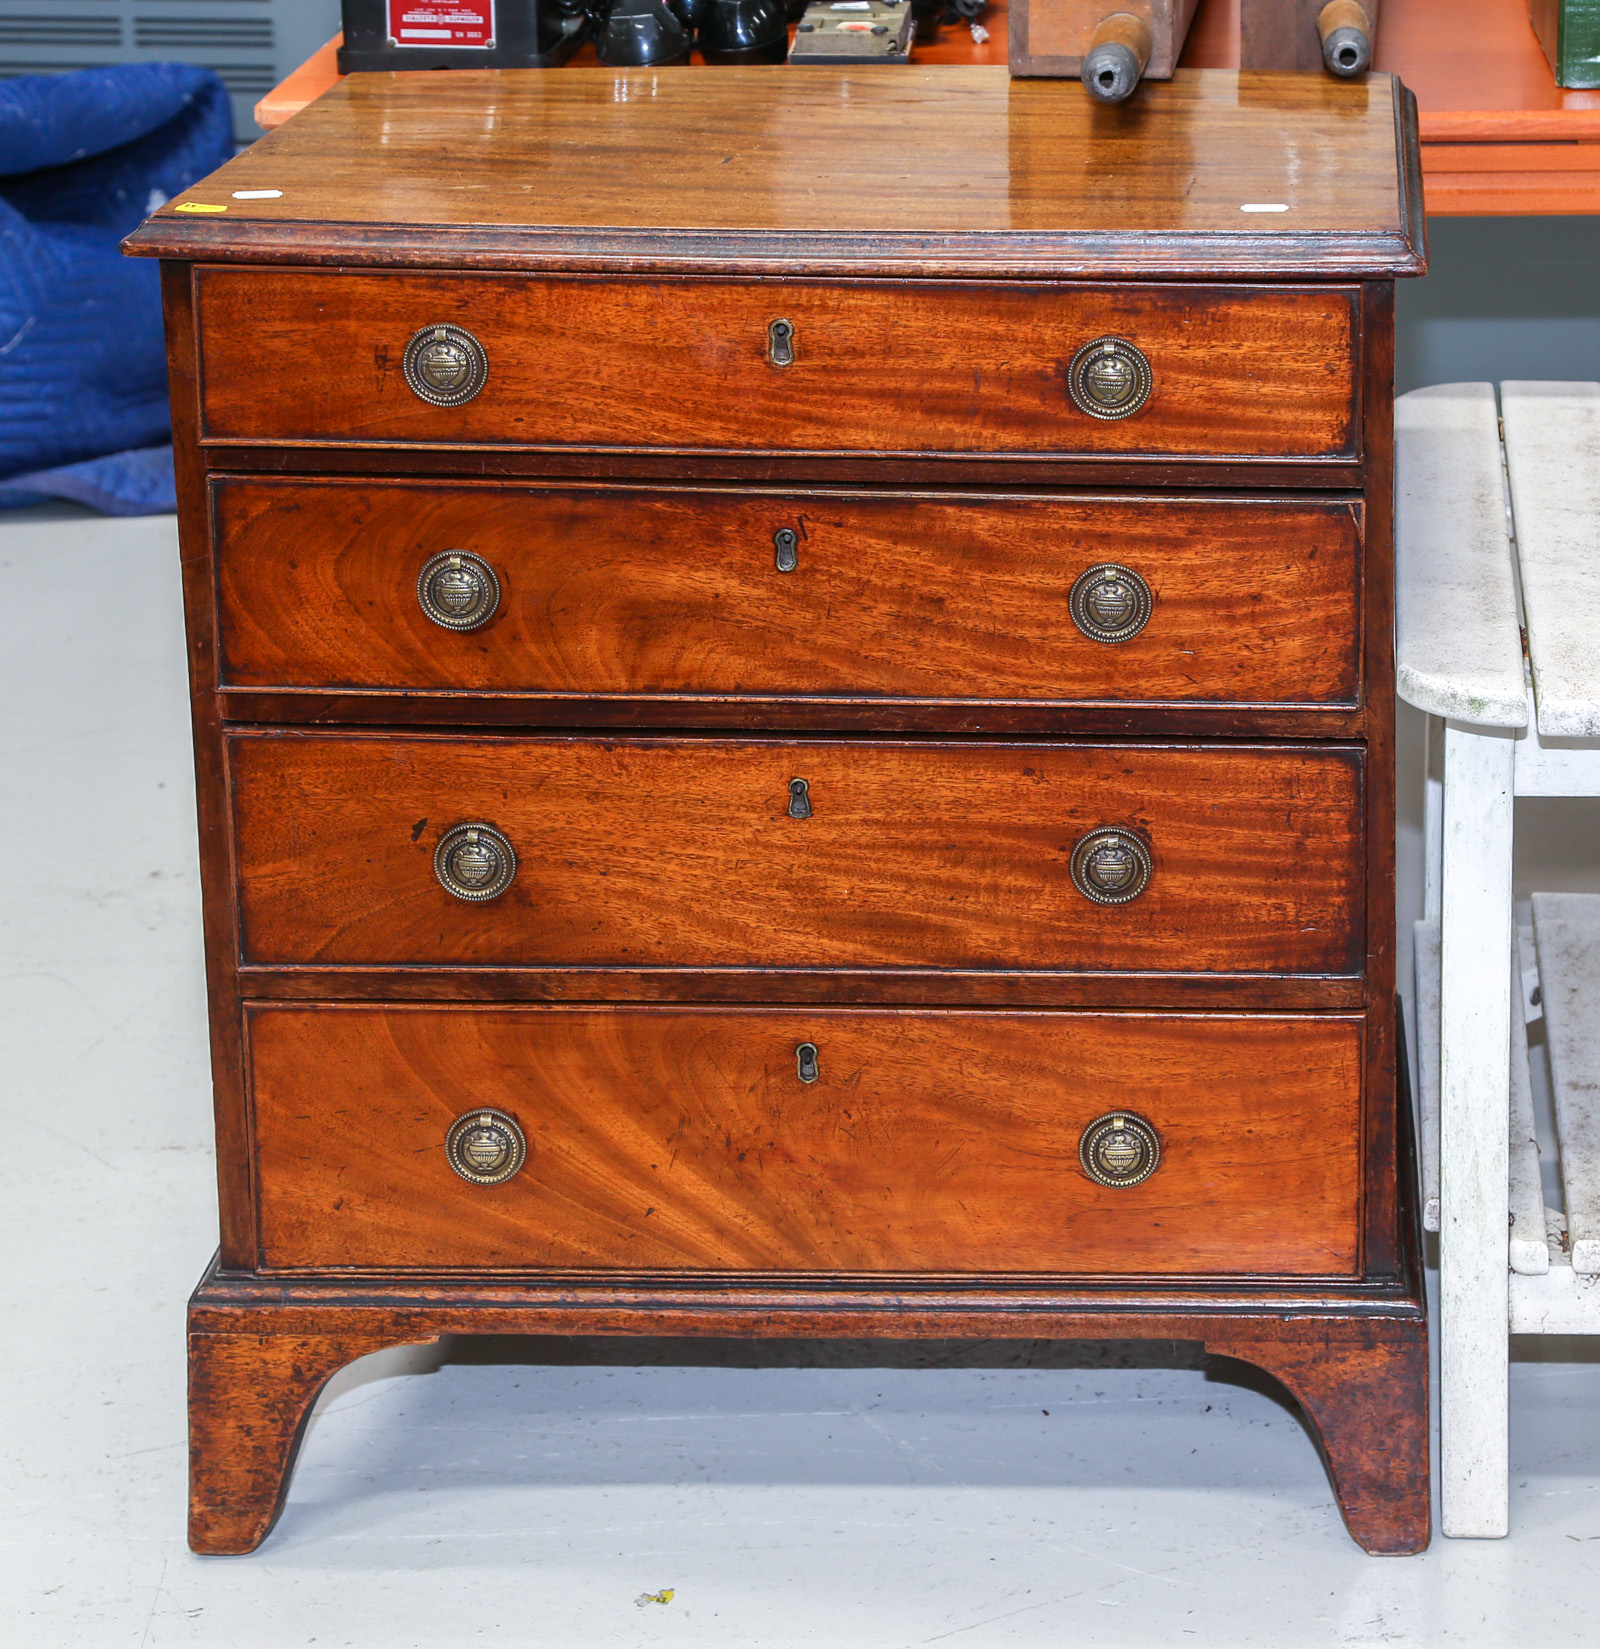 ANTIQUE MAHOGANY CHEST OF DRAWERS